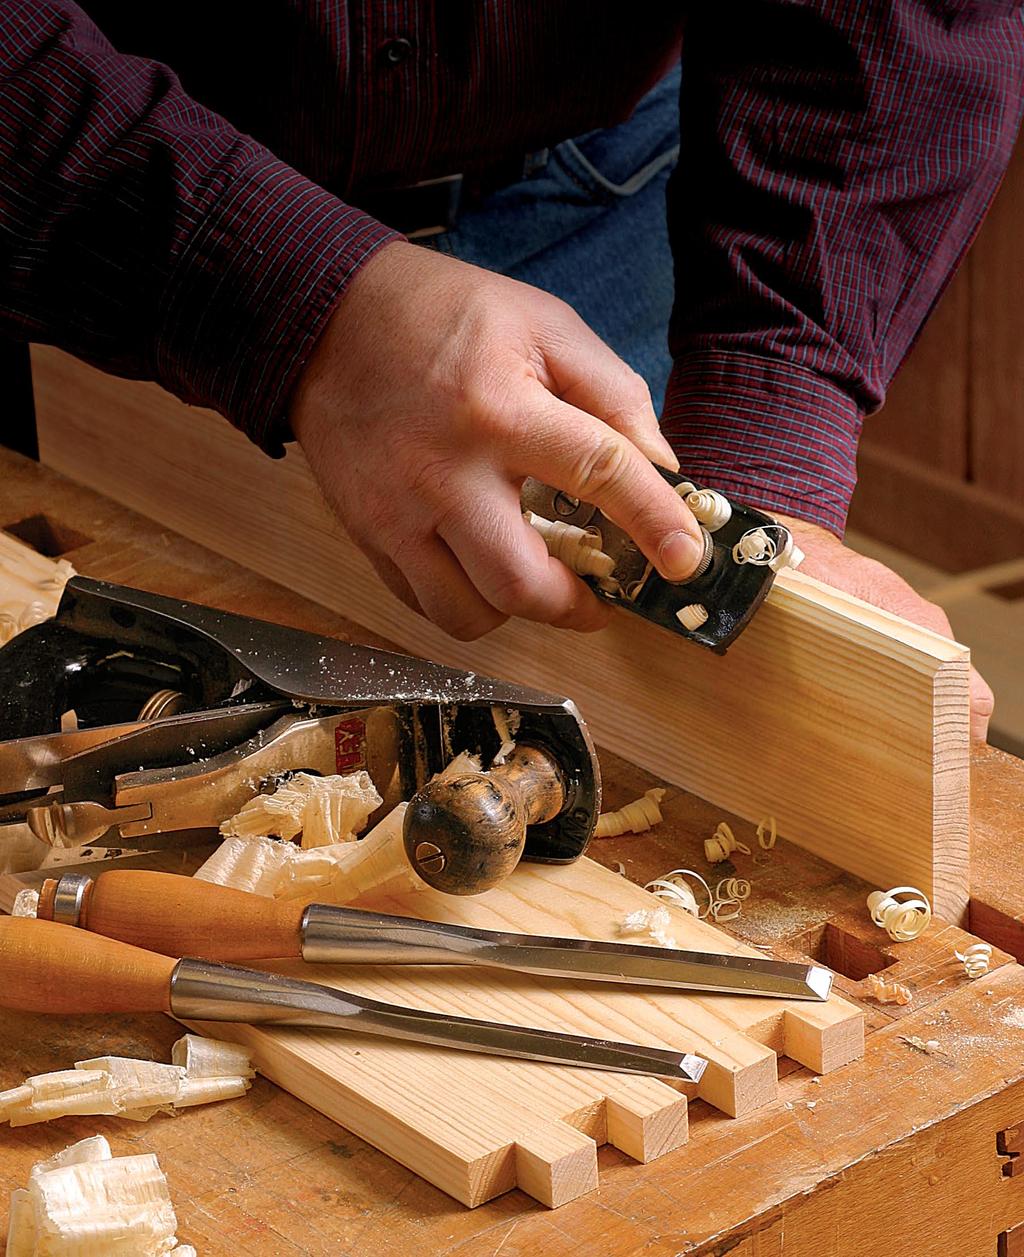 Hone Your Hand-Tool Skills A handful of exercises develops competence and confidence with chisels, planes, and saws B Y M I C H A E L P E K O V I C H Hand tools intimidated me for a long time.